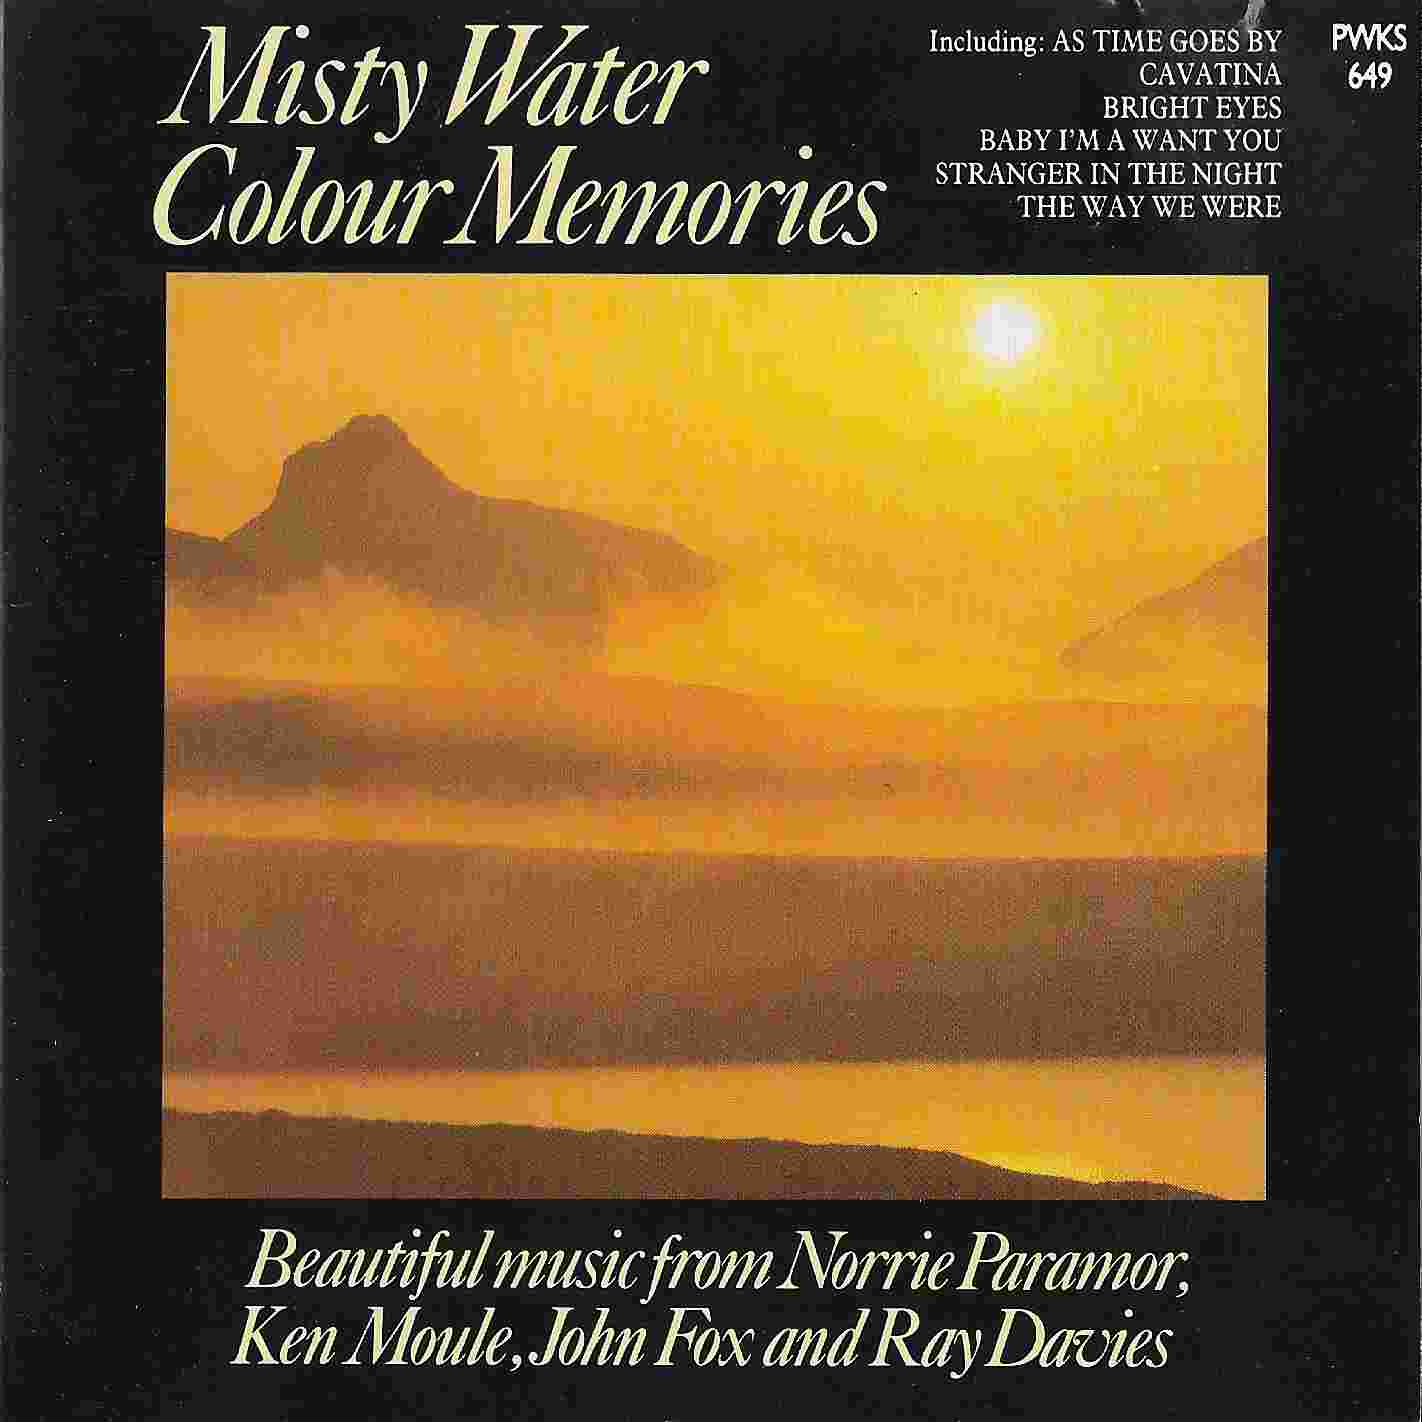 Picture of PWKS 649 Misty water - Colour memories by artist Various from the BBC cds - Records and Tapes library